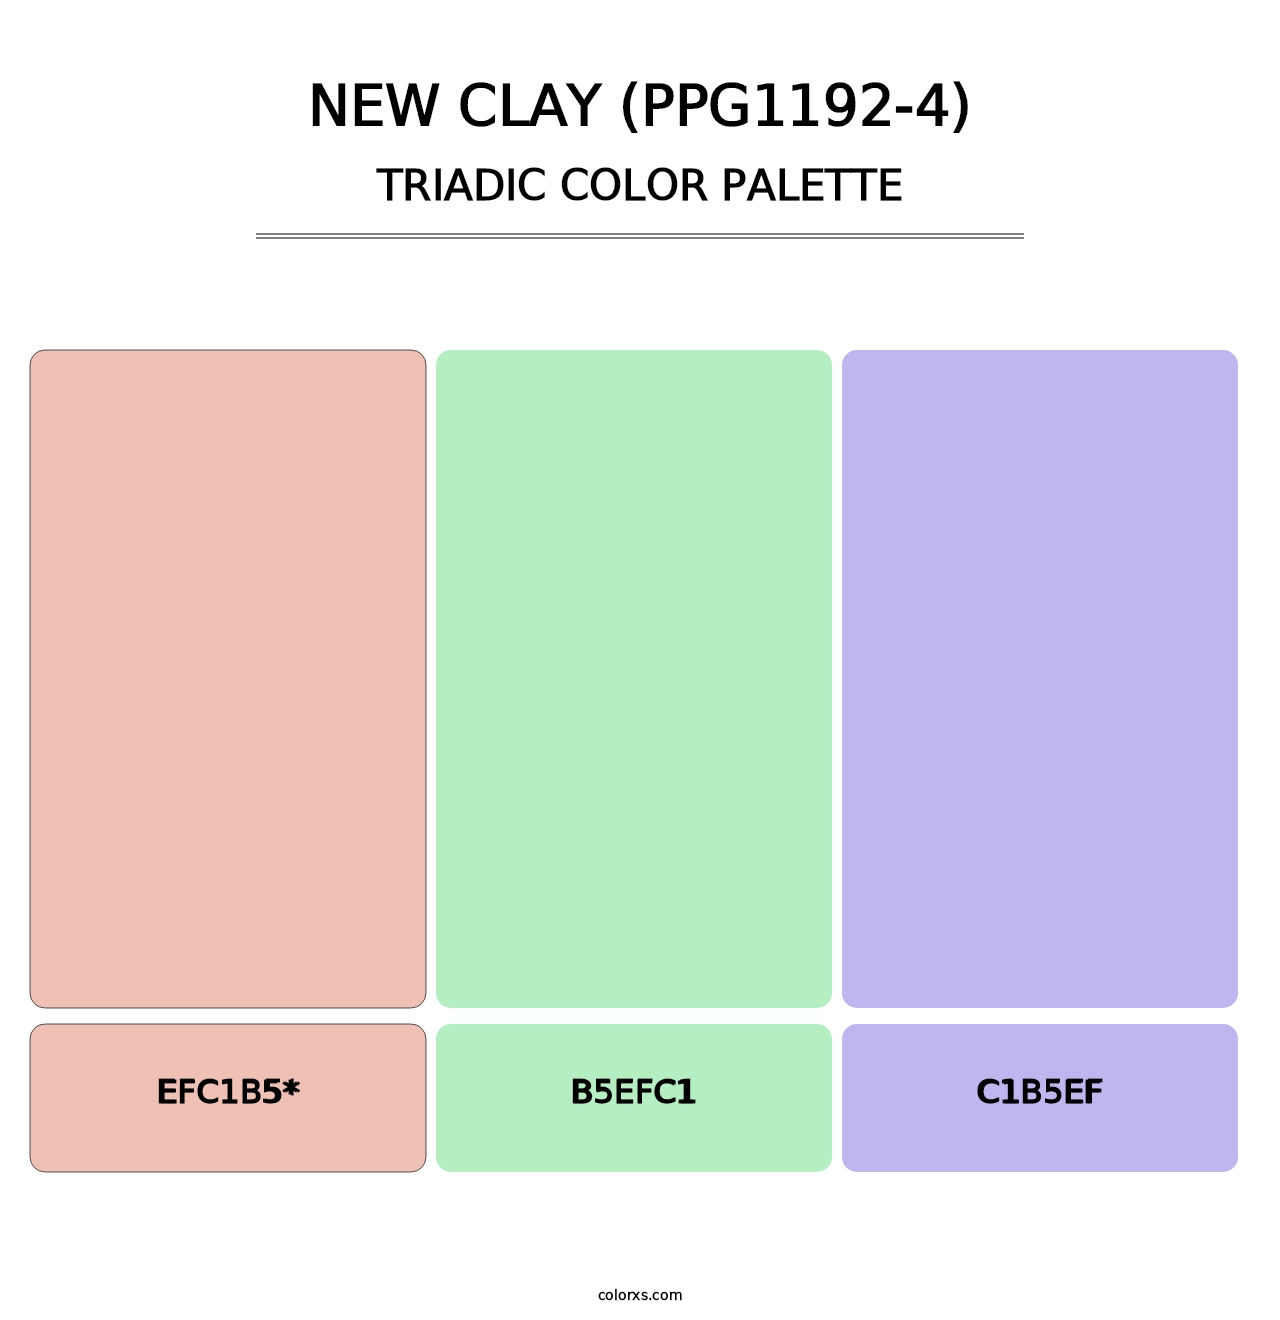 New Clay (PPG1192-4) - Triadic Color Palette